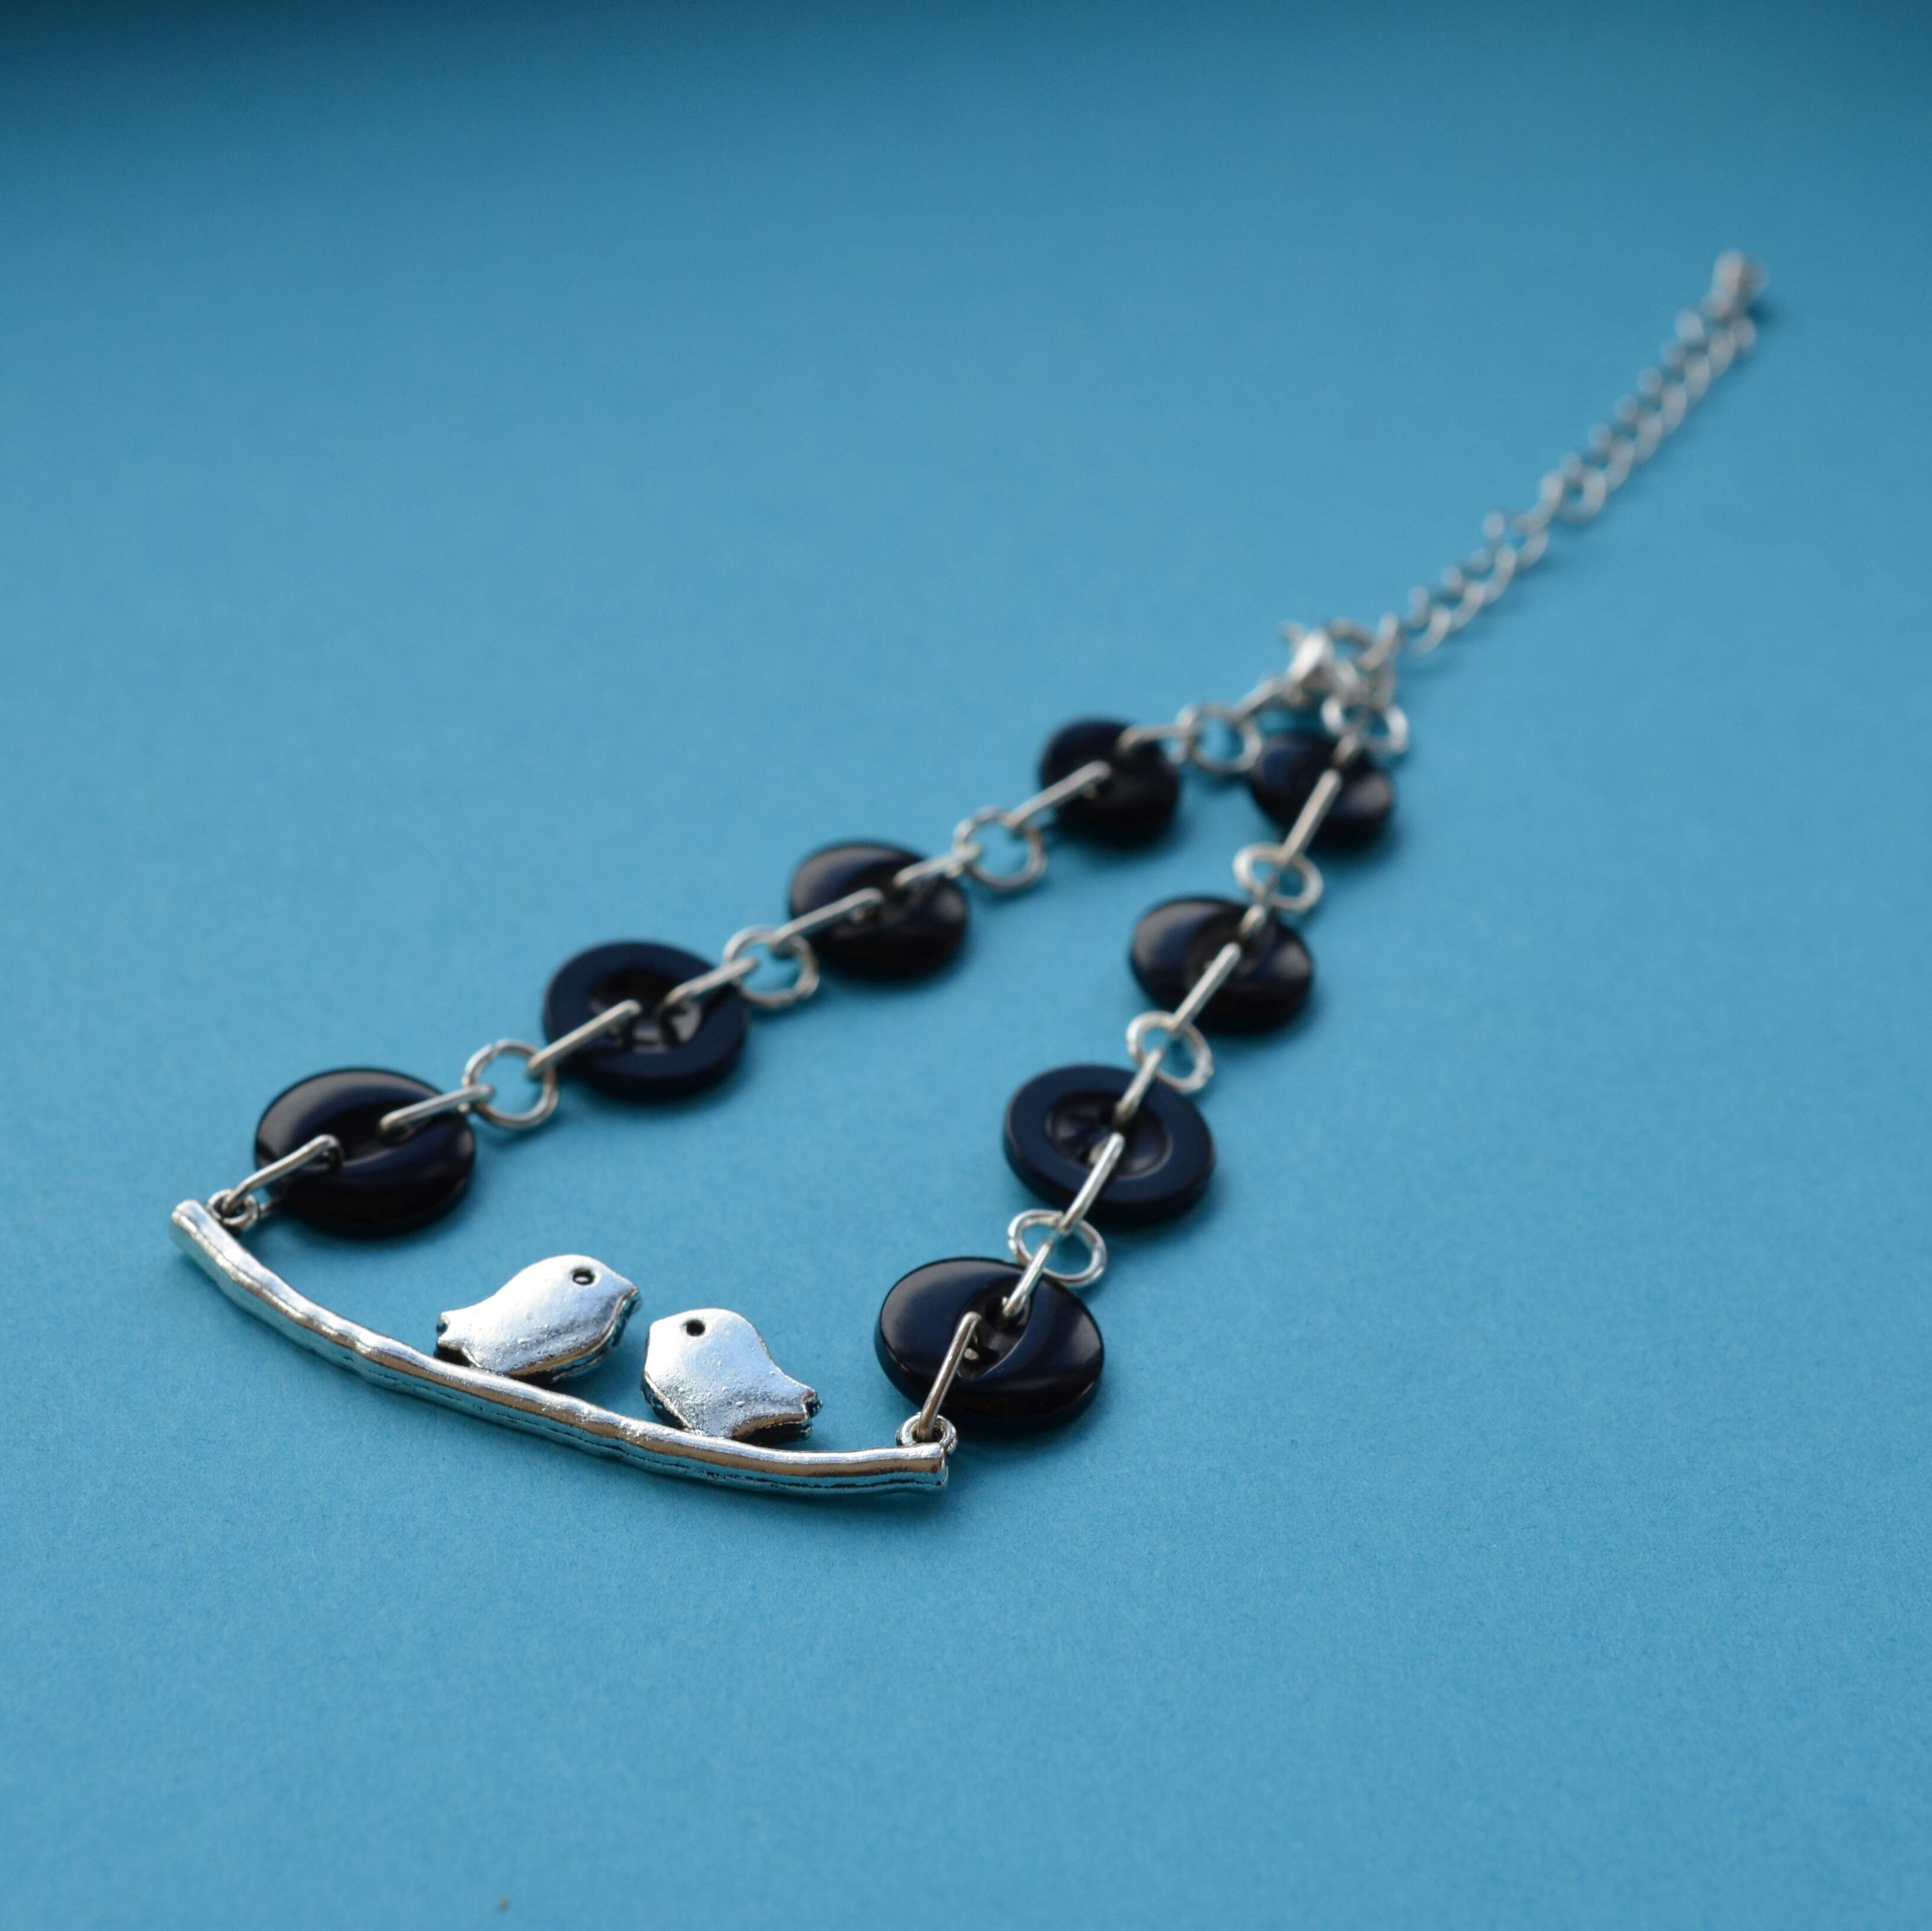 Black Bird on a Wire Necklace